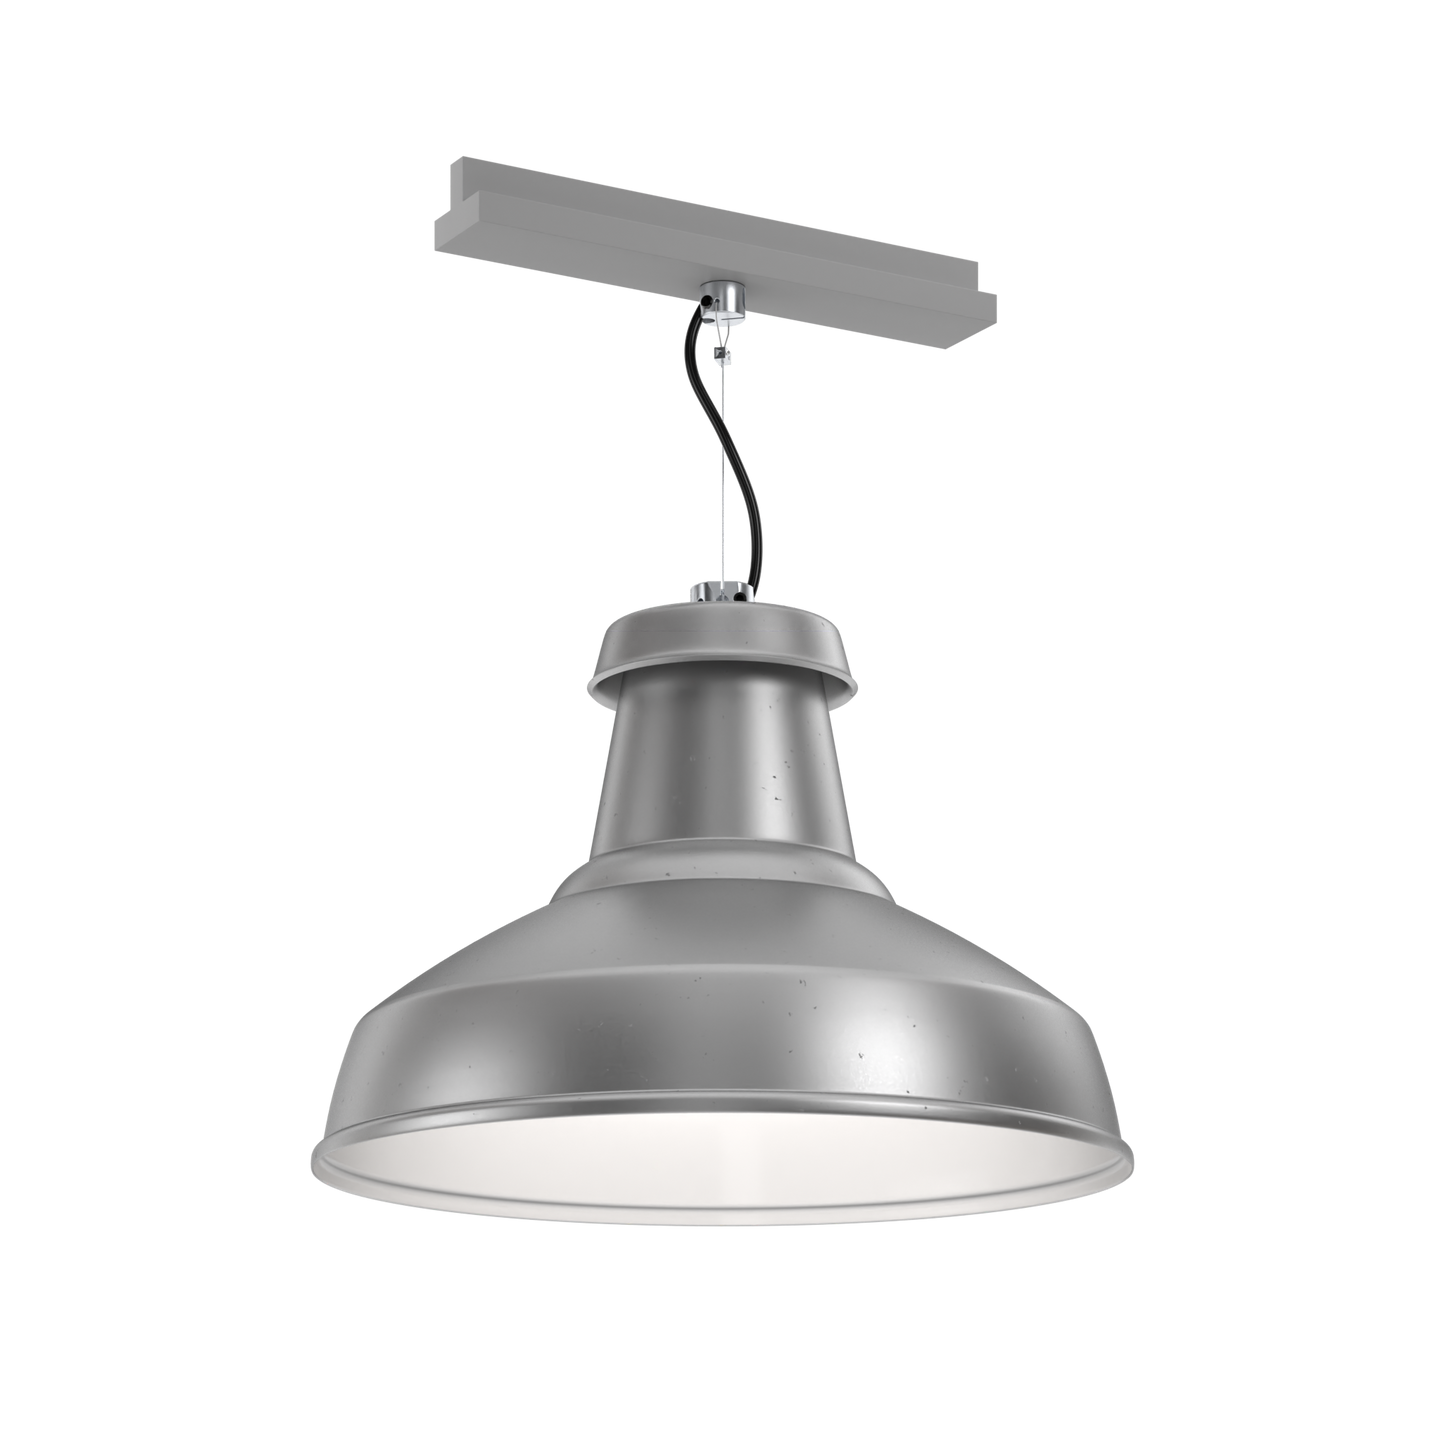 A paint-free architectural pendant light that's designed for circular economy, on a track adaptor with integral driver